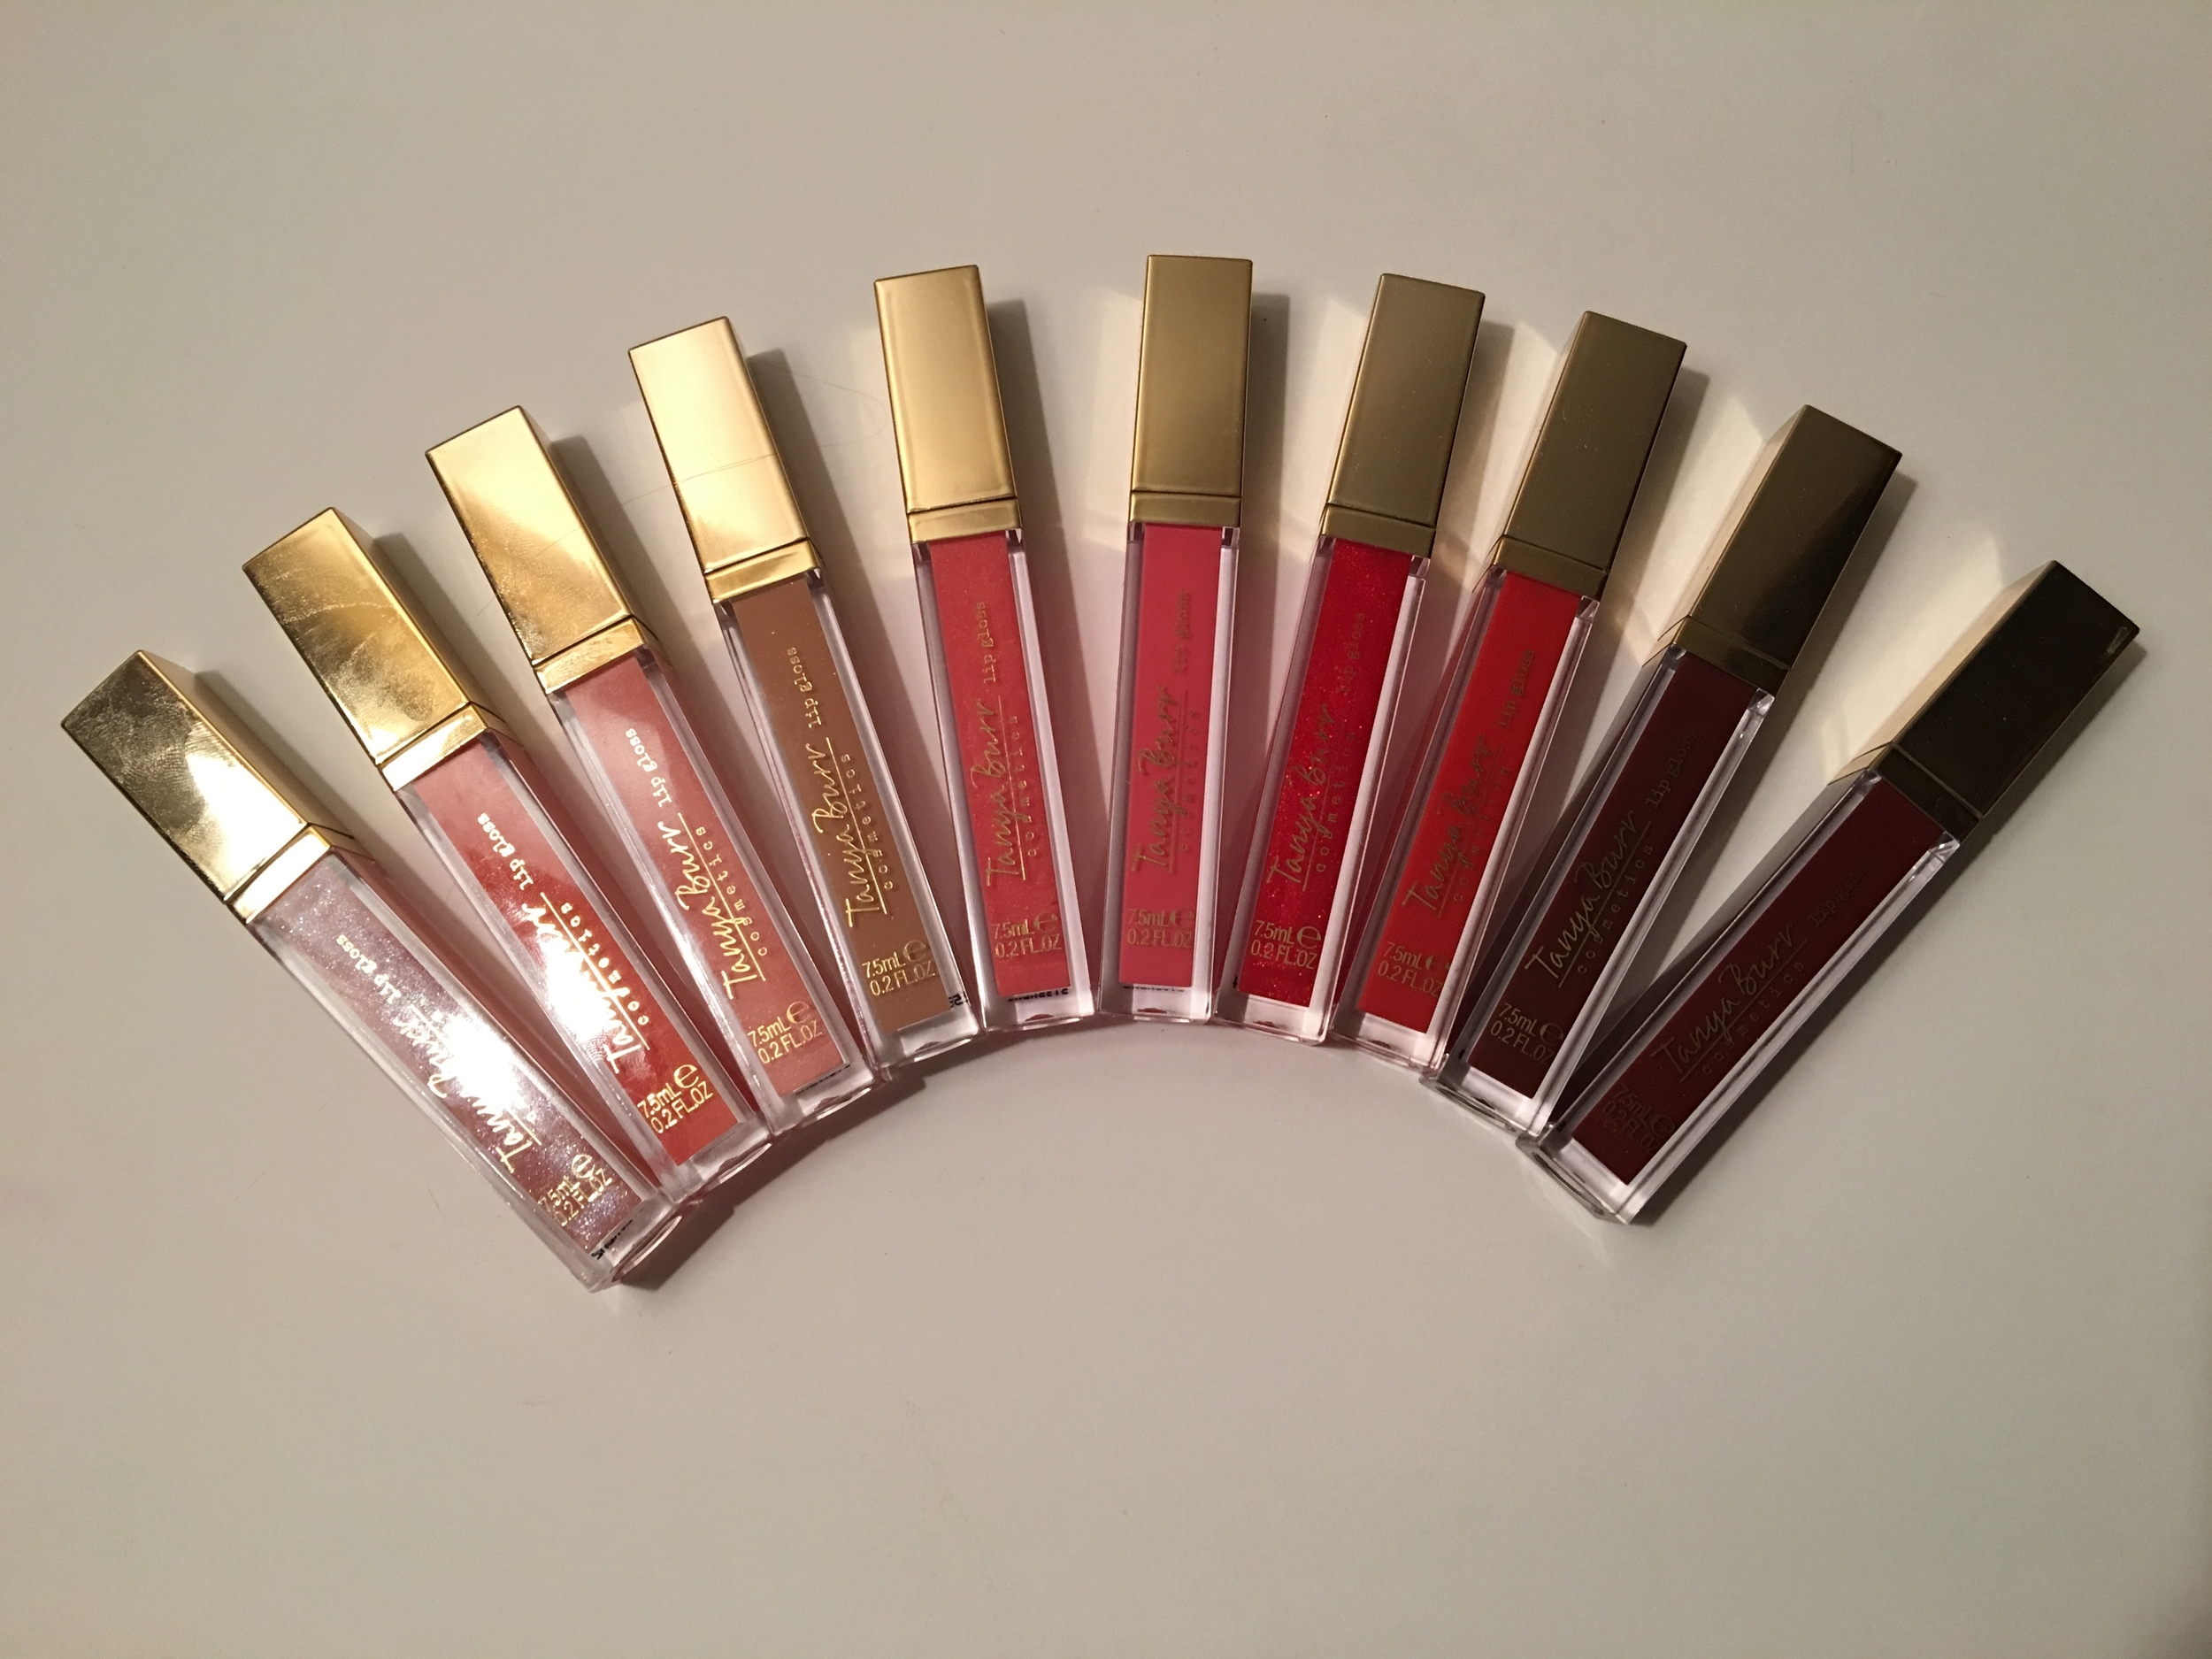 Tanya Burr Lip Gloss First Impressions and Swatches